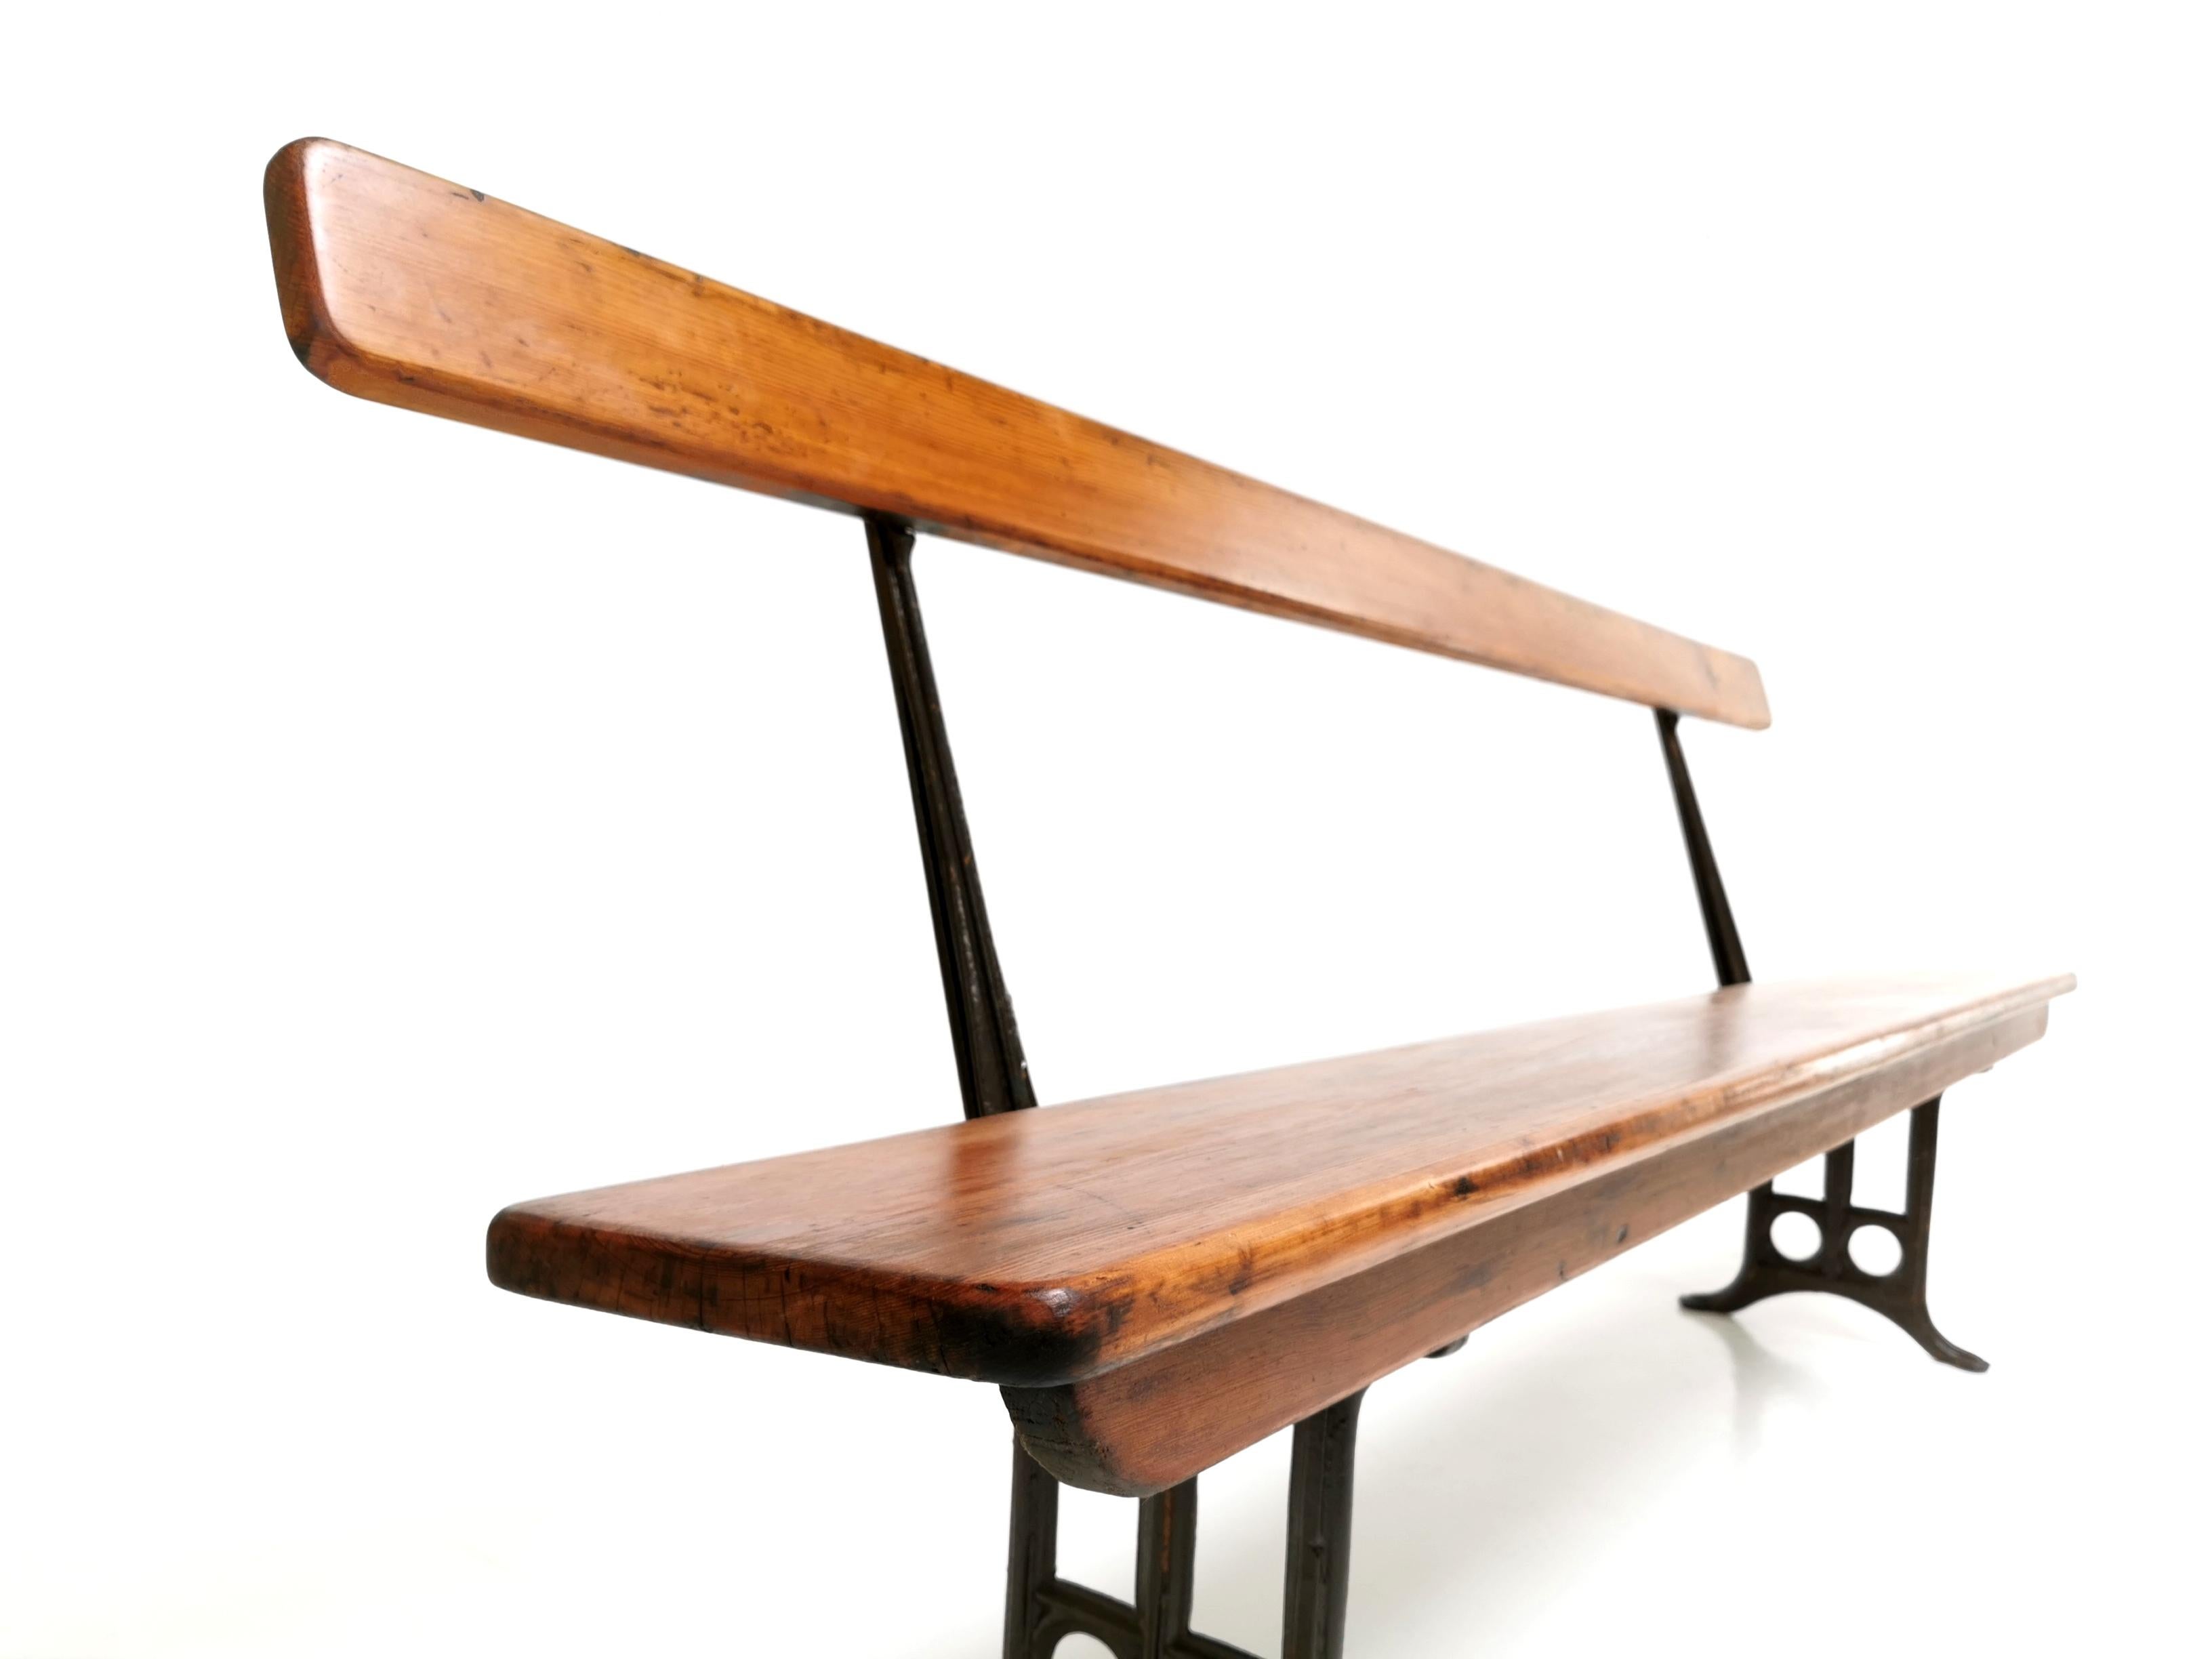 A superb Victorian railway bench.

Ideal for the hallway, or along the side of a table or for use in the garden.

The wood has a gorgeous rich colour and the cast iron supports are solid and the bench is very sturdy.

British, late